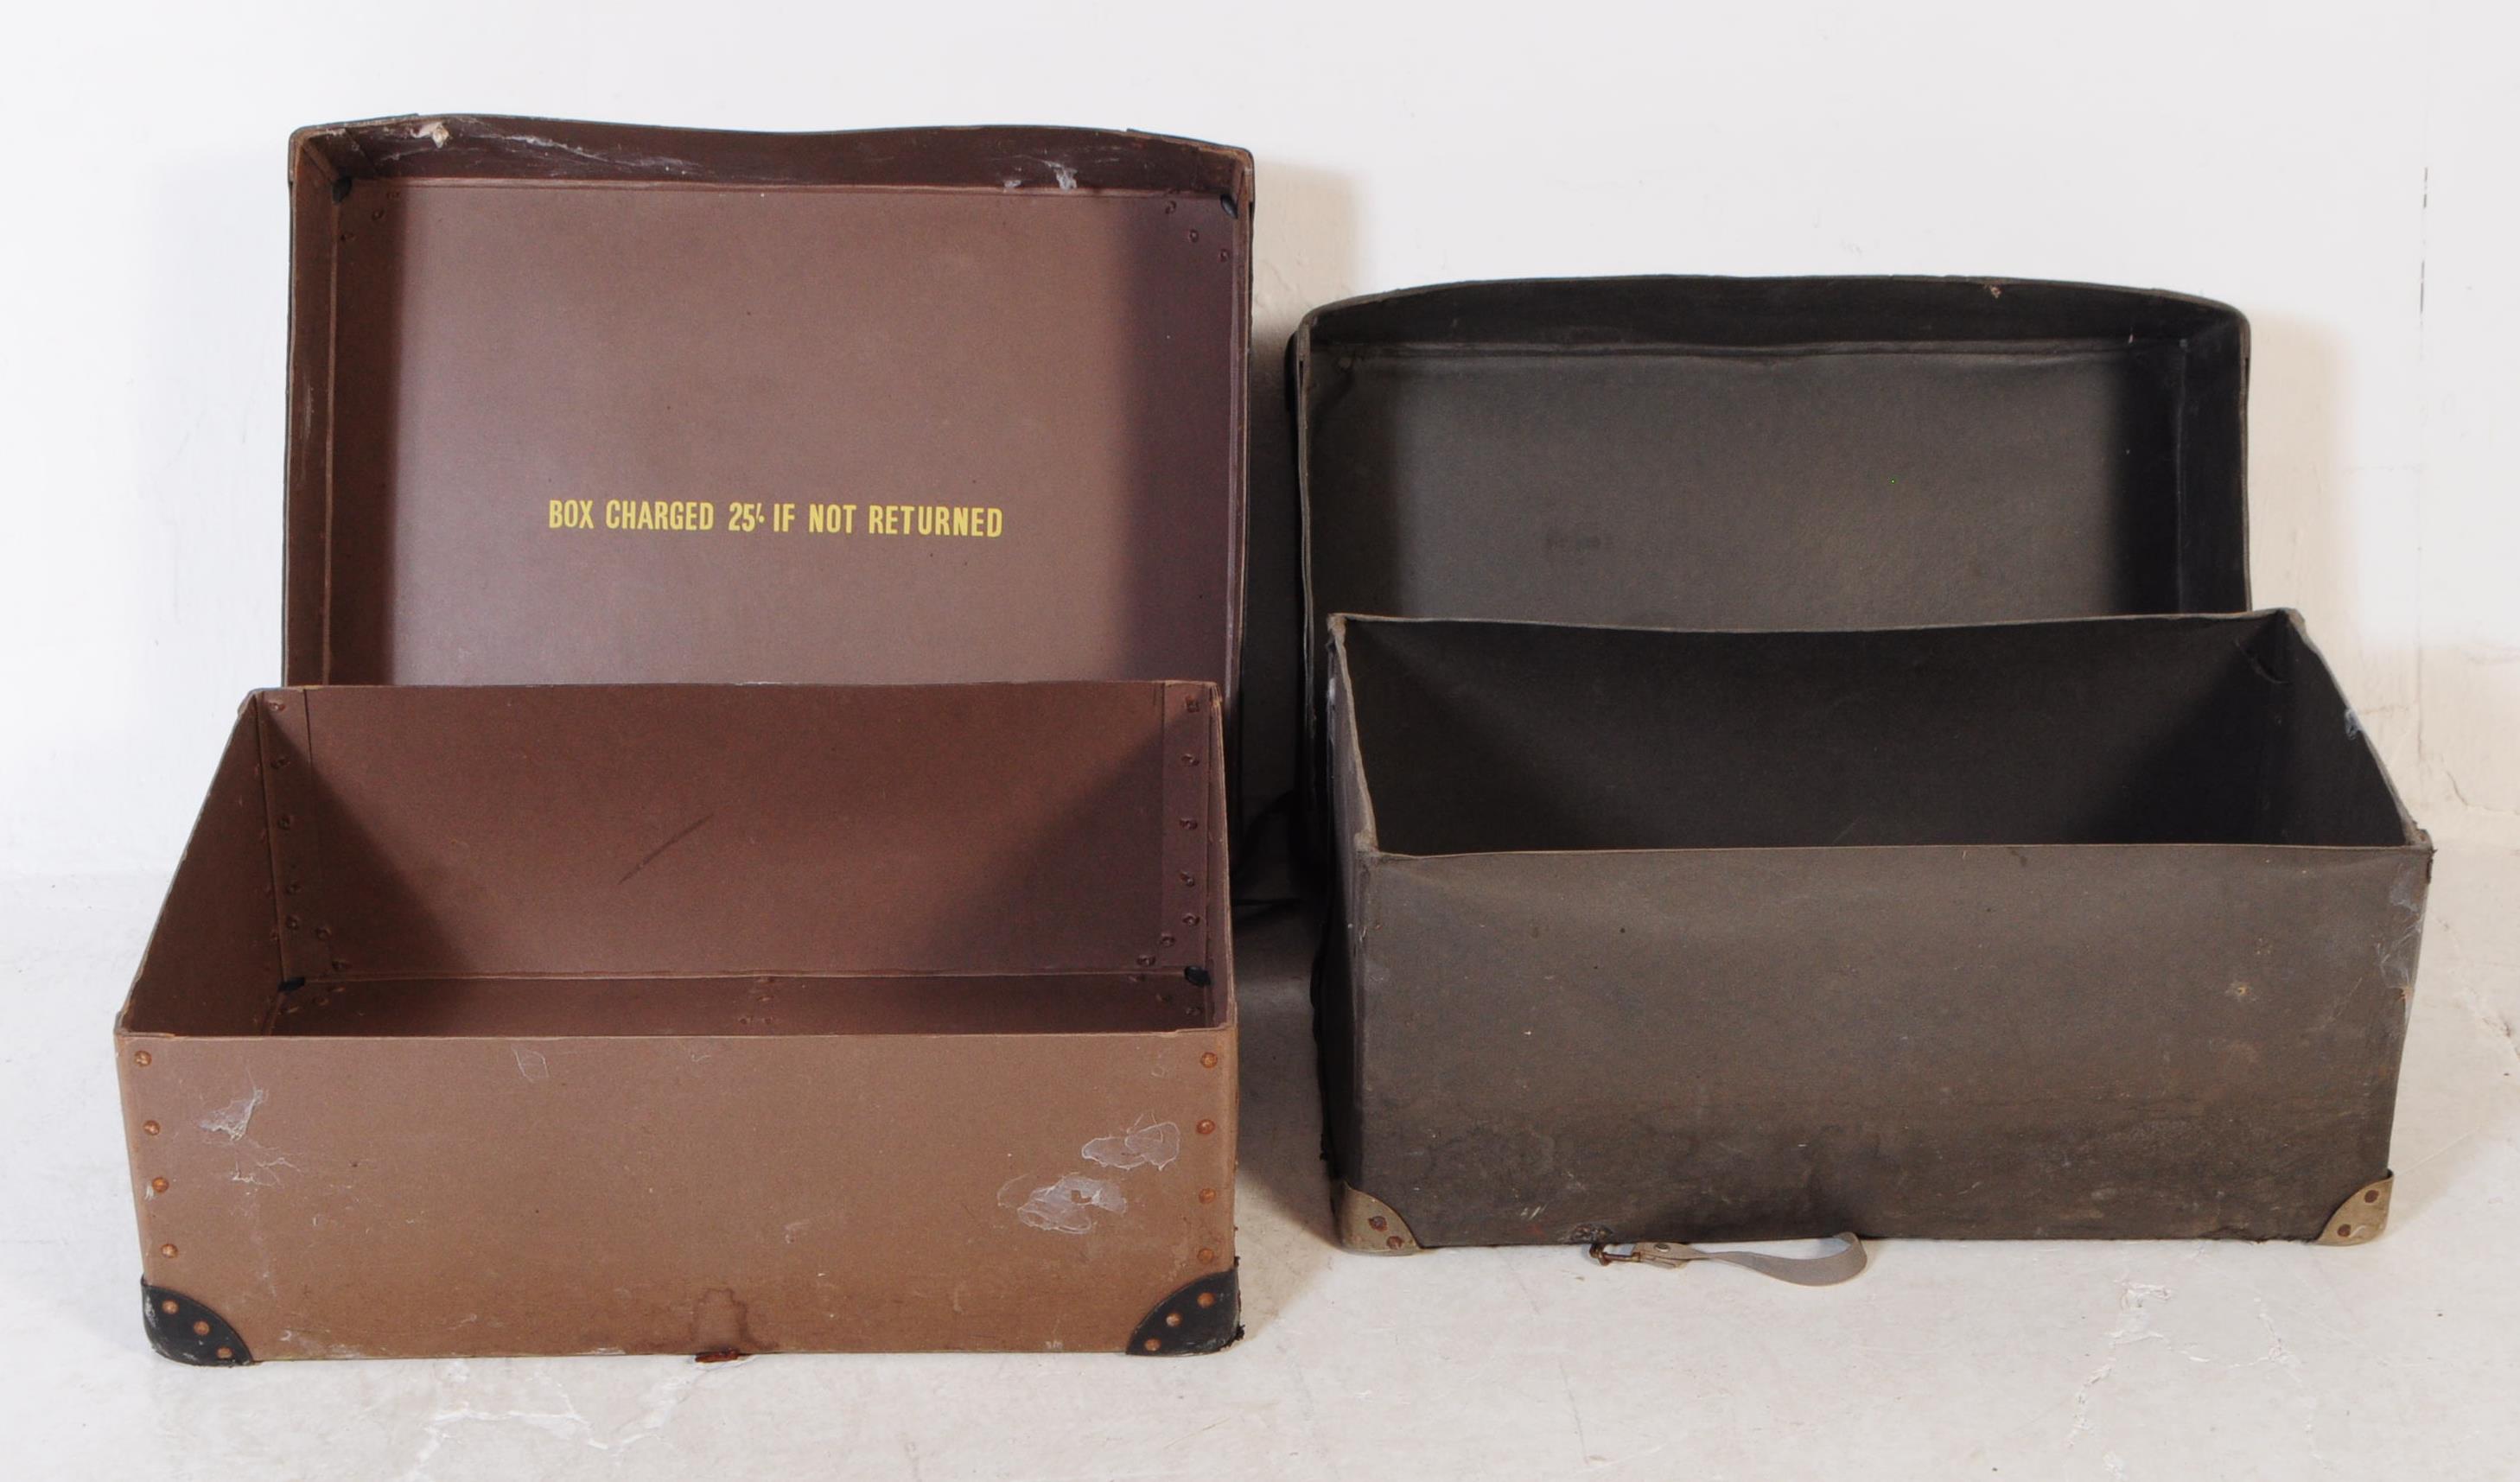 ALTON DRY CLEANING & OTHER MID CENTURY LAUNDRY STORAGE BOXES - Image 4 of 6